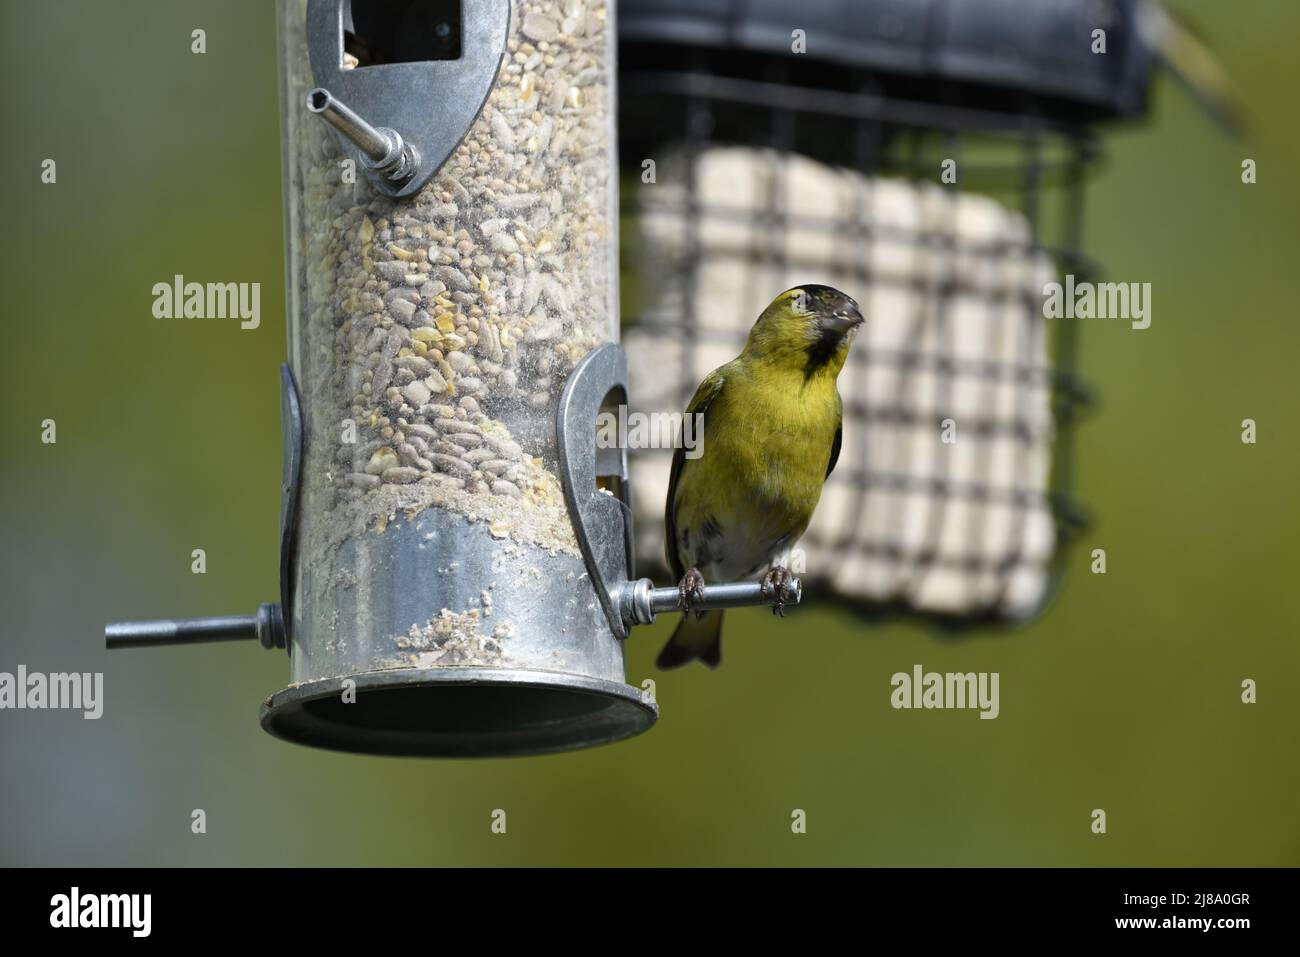 Close-Up of a Male Eurasian Siskin (Carduelis spinus) Perched on the Peg of a Mixed Seed Feeder in the Sun, Looking Skywards, Against Green Background Stock Photo